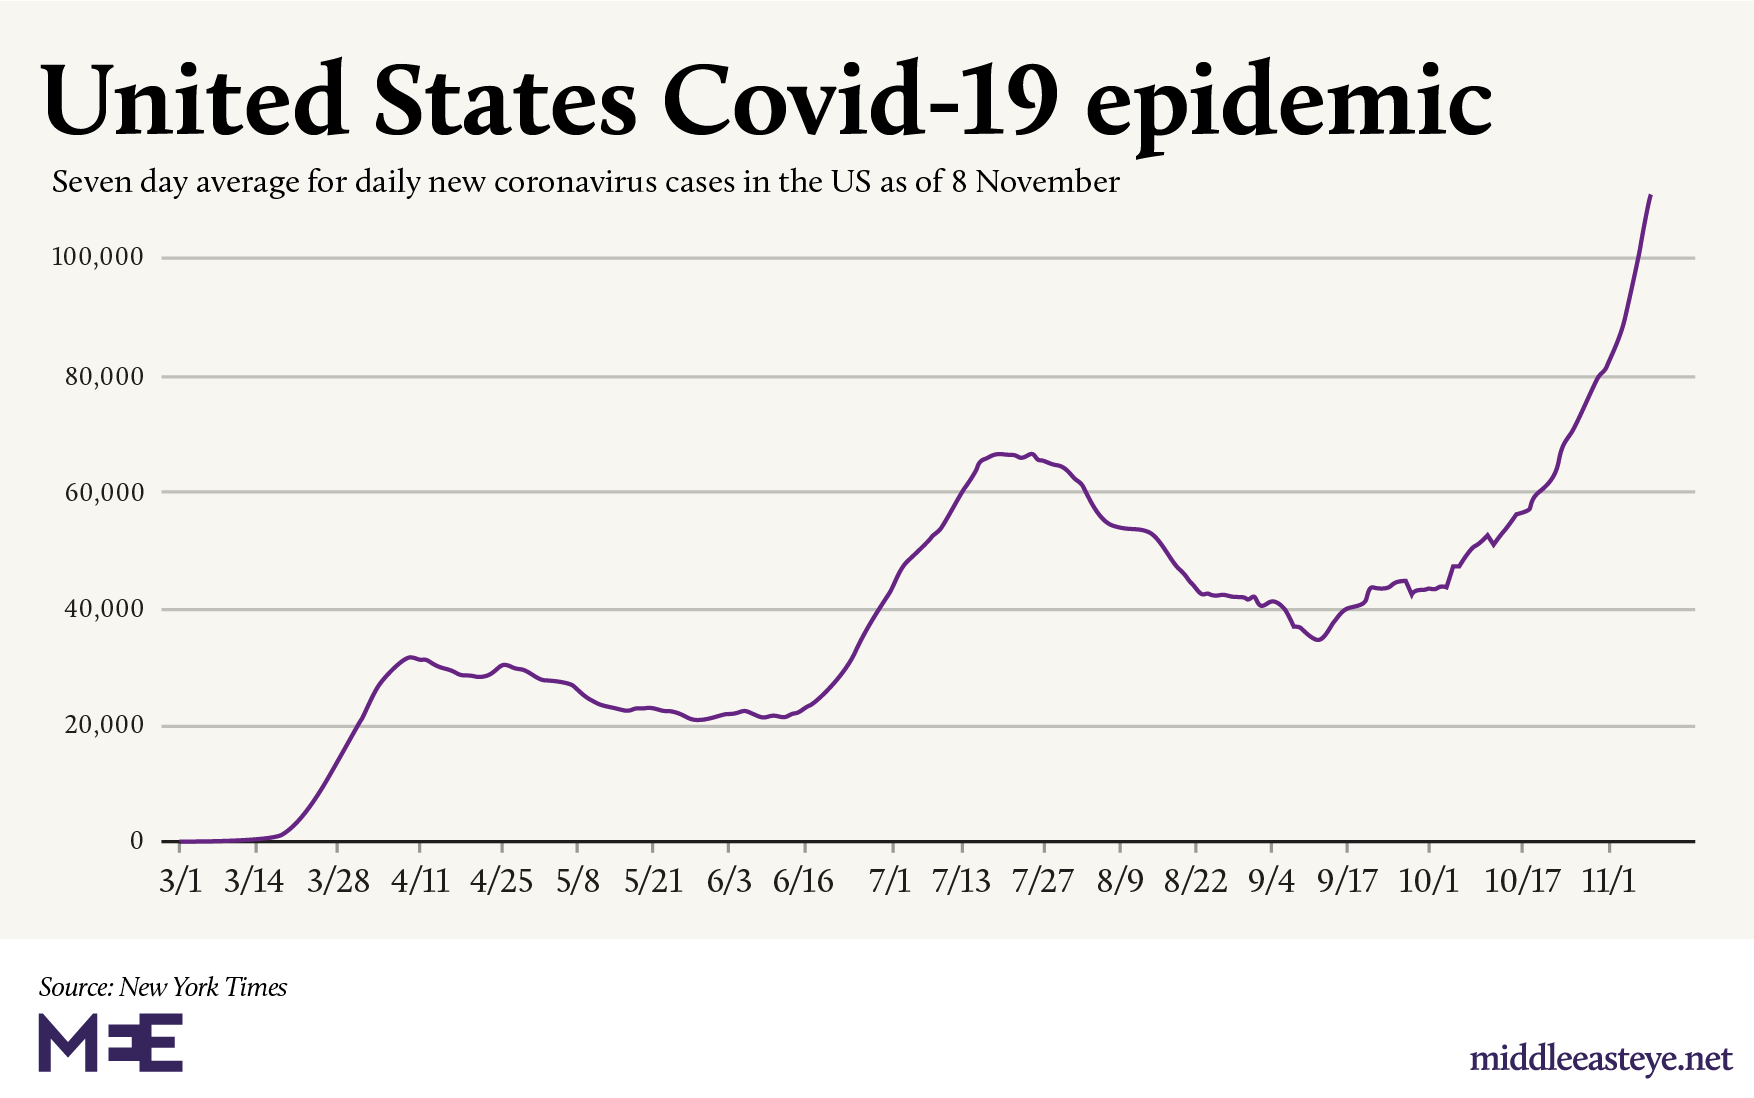 US Covid-19 graph from March 2020 until November 2020